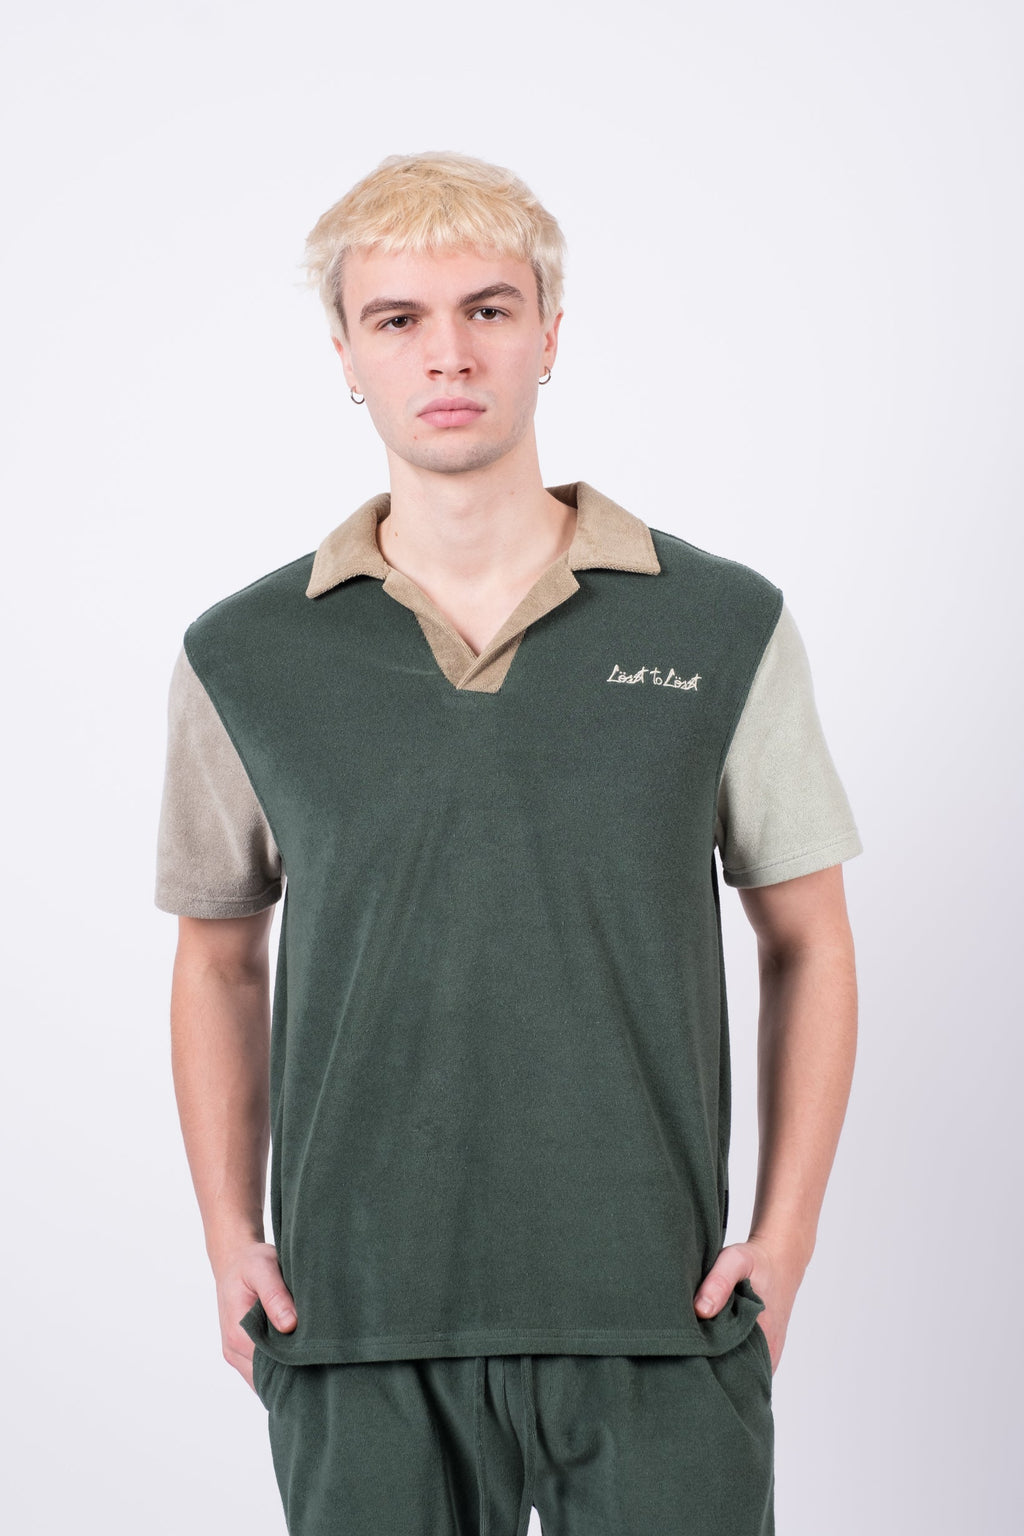 Heavyweight terrycloth polo shirt with Resort capsule collection patch